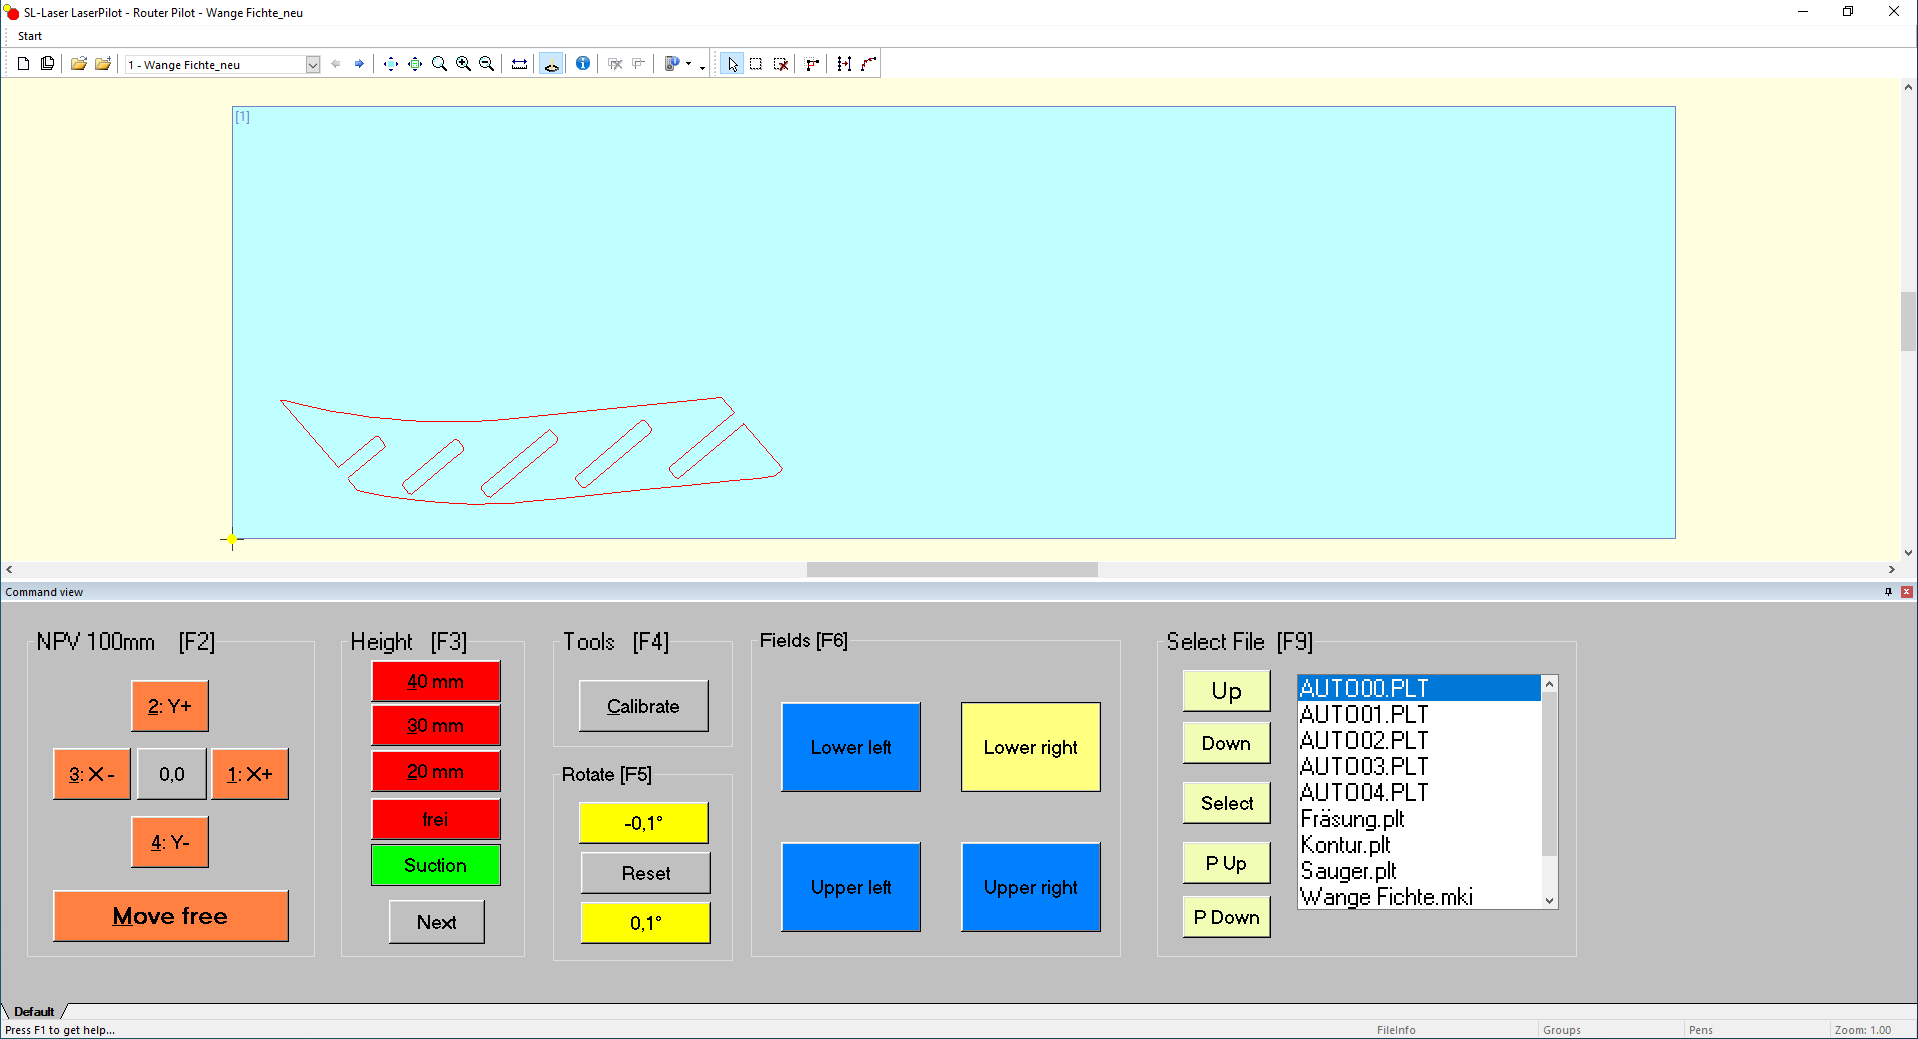 Router Pilot - The software for advanced CNC router applications in wood, stone and plastics